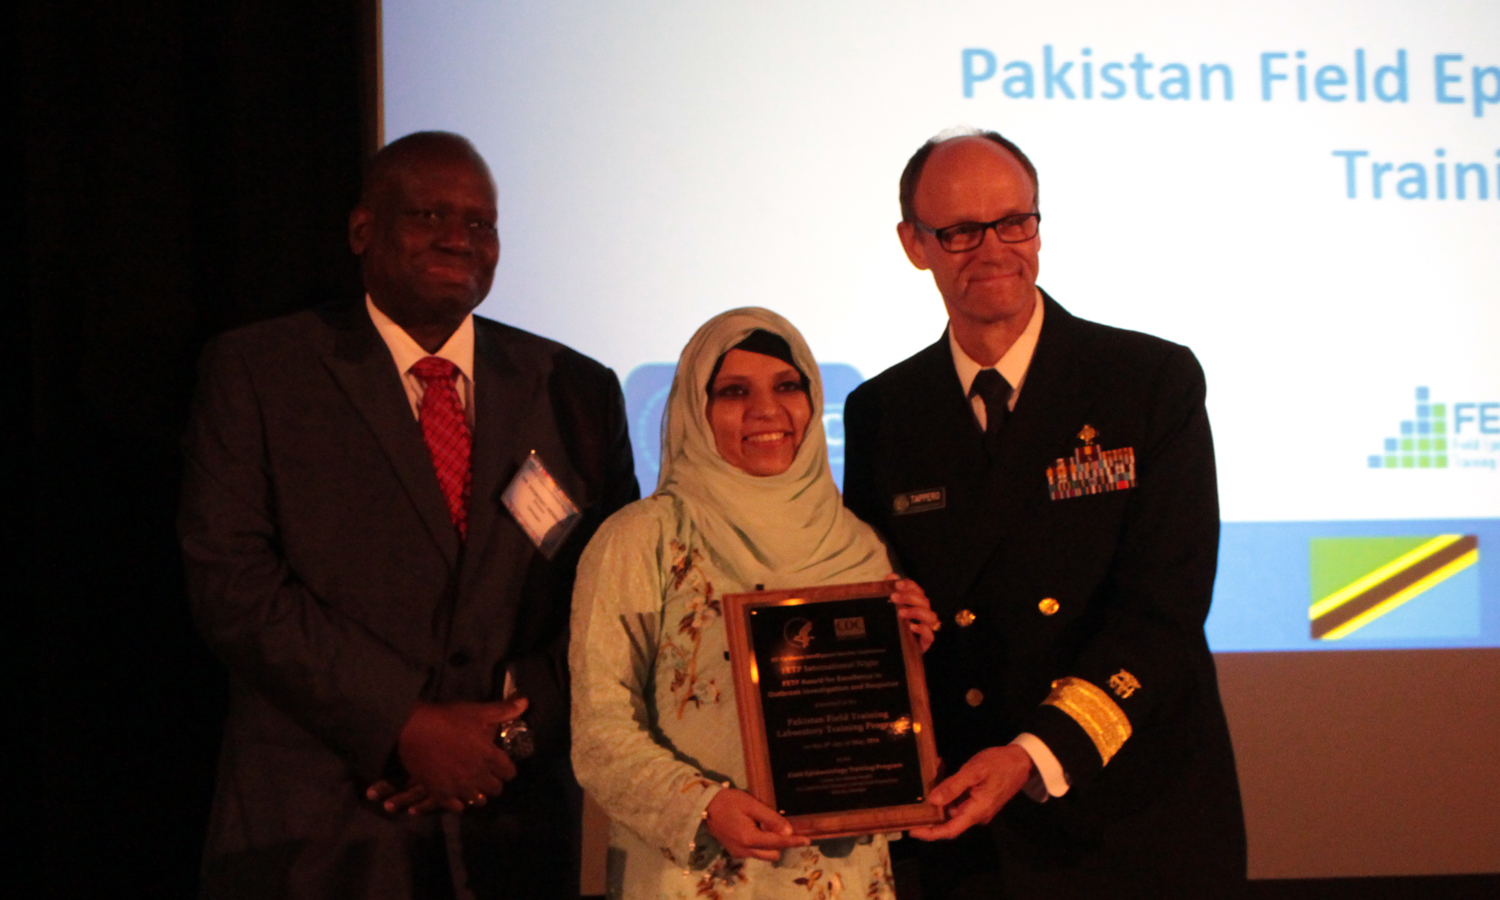 Pakistan FELTP wins the CDC Director's Award for Excellence in Epidemiology and Public Health Response at the 2016 EIS Conference in Atlanta.